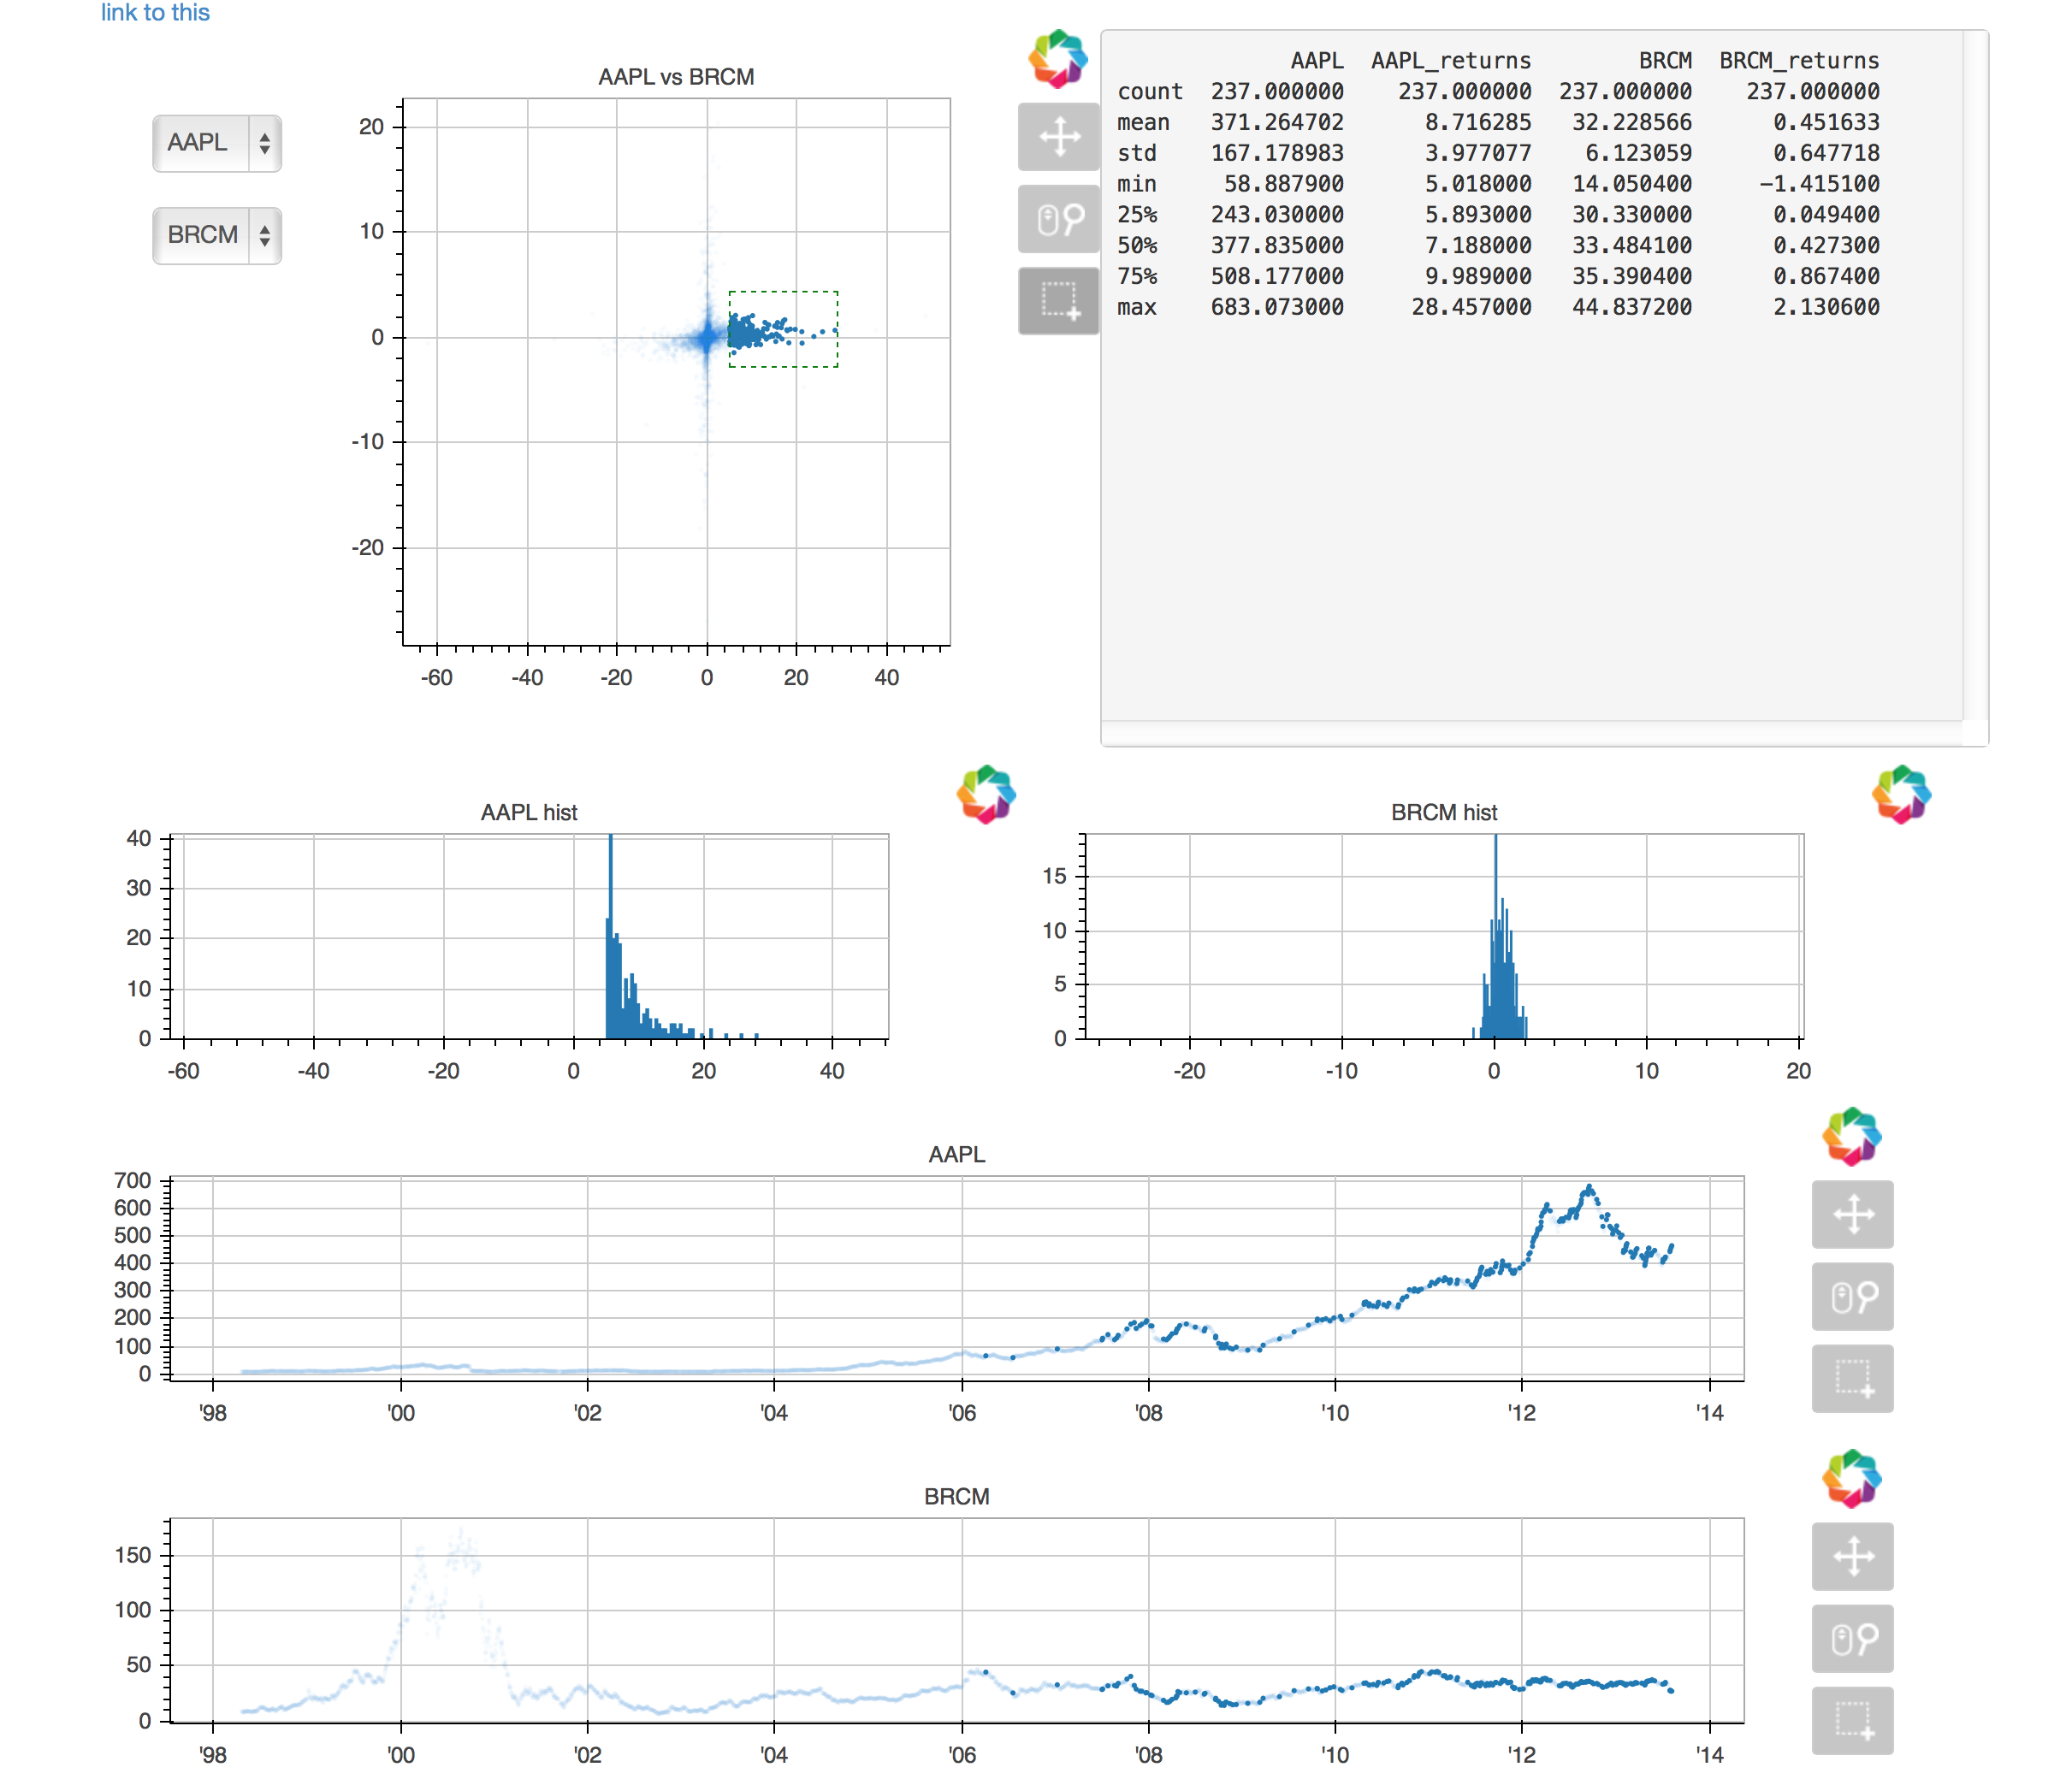 How to plot an animated graph in Matlab - Quora